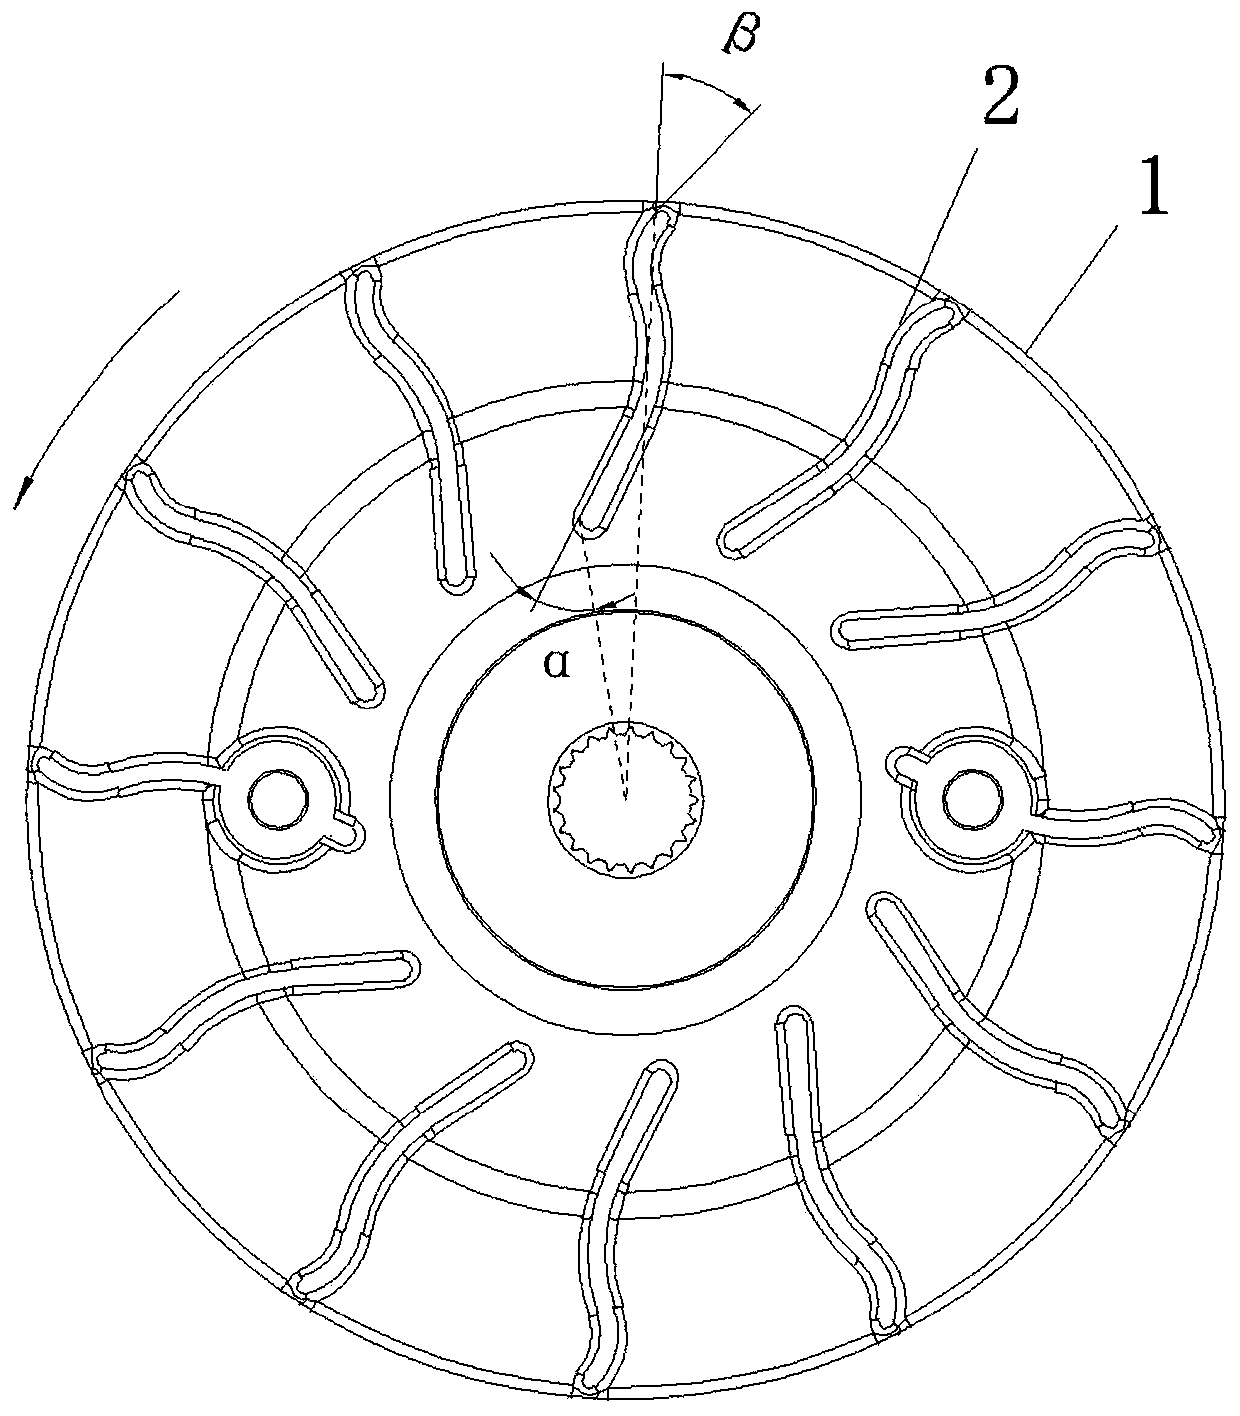 Cooling fan, air cooling system and engine